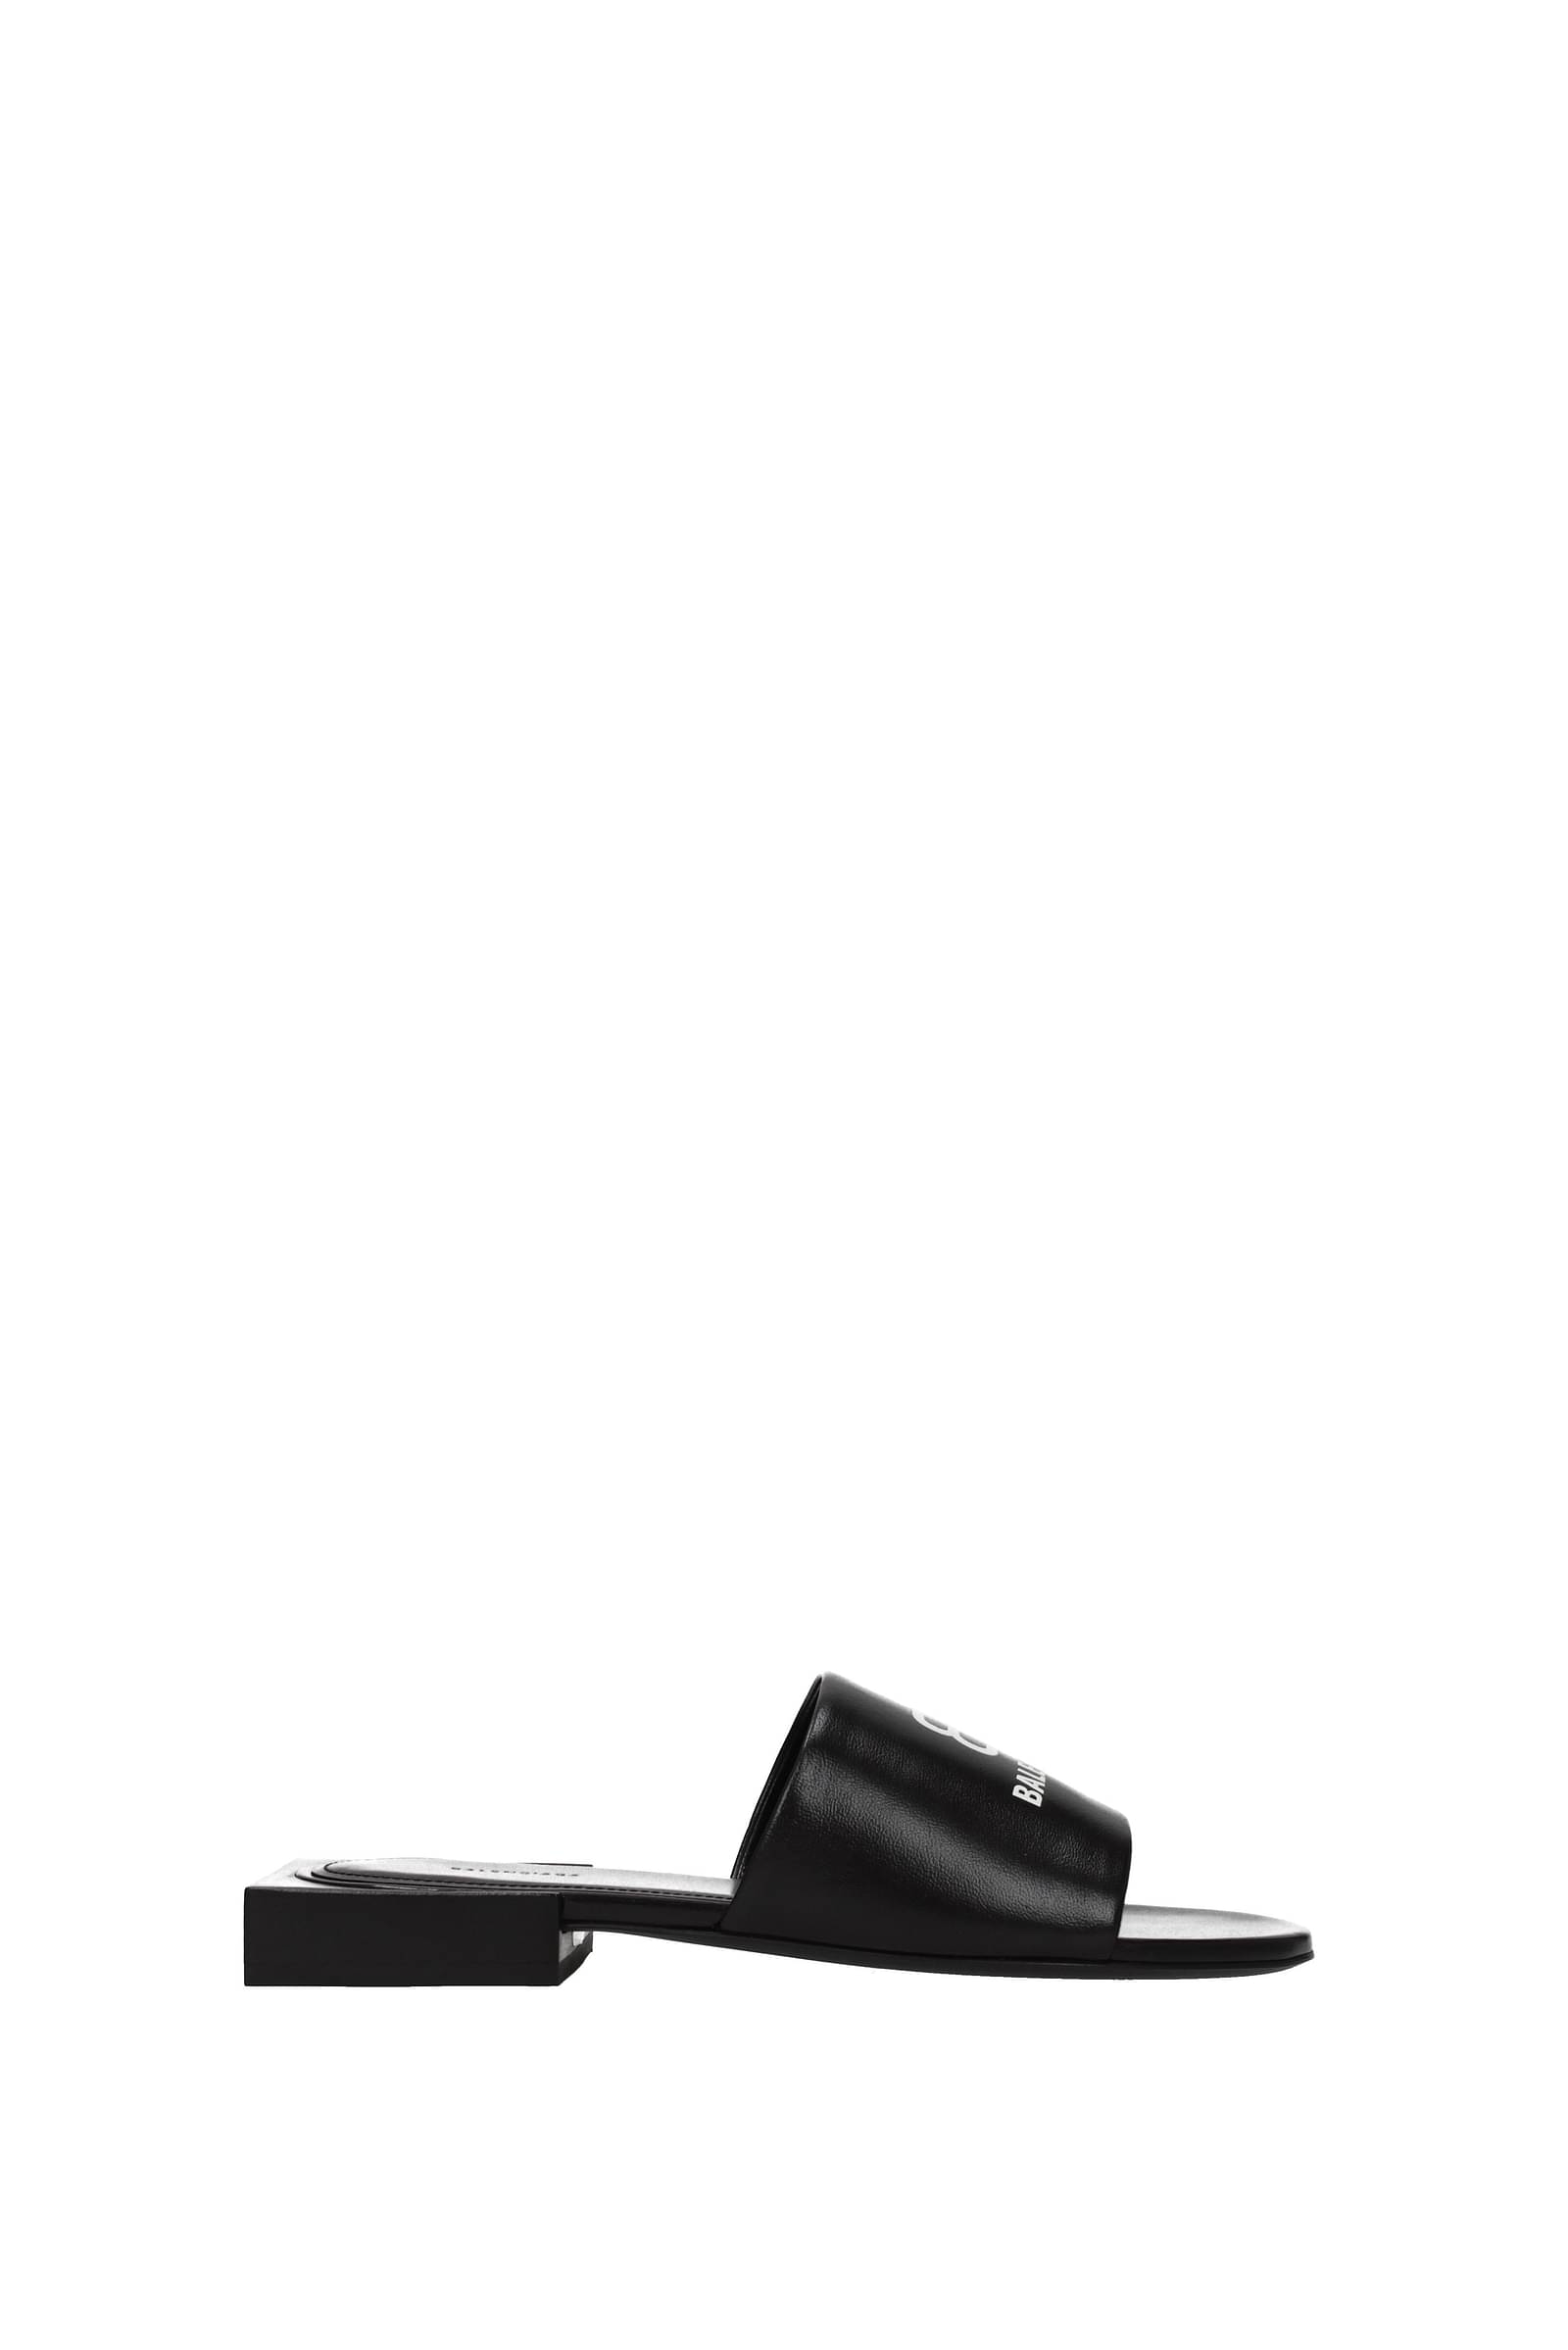 Balenciaga Leather BB Square Toe Slippers women  Glamood Outlet